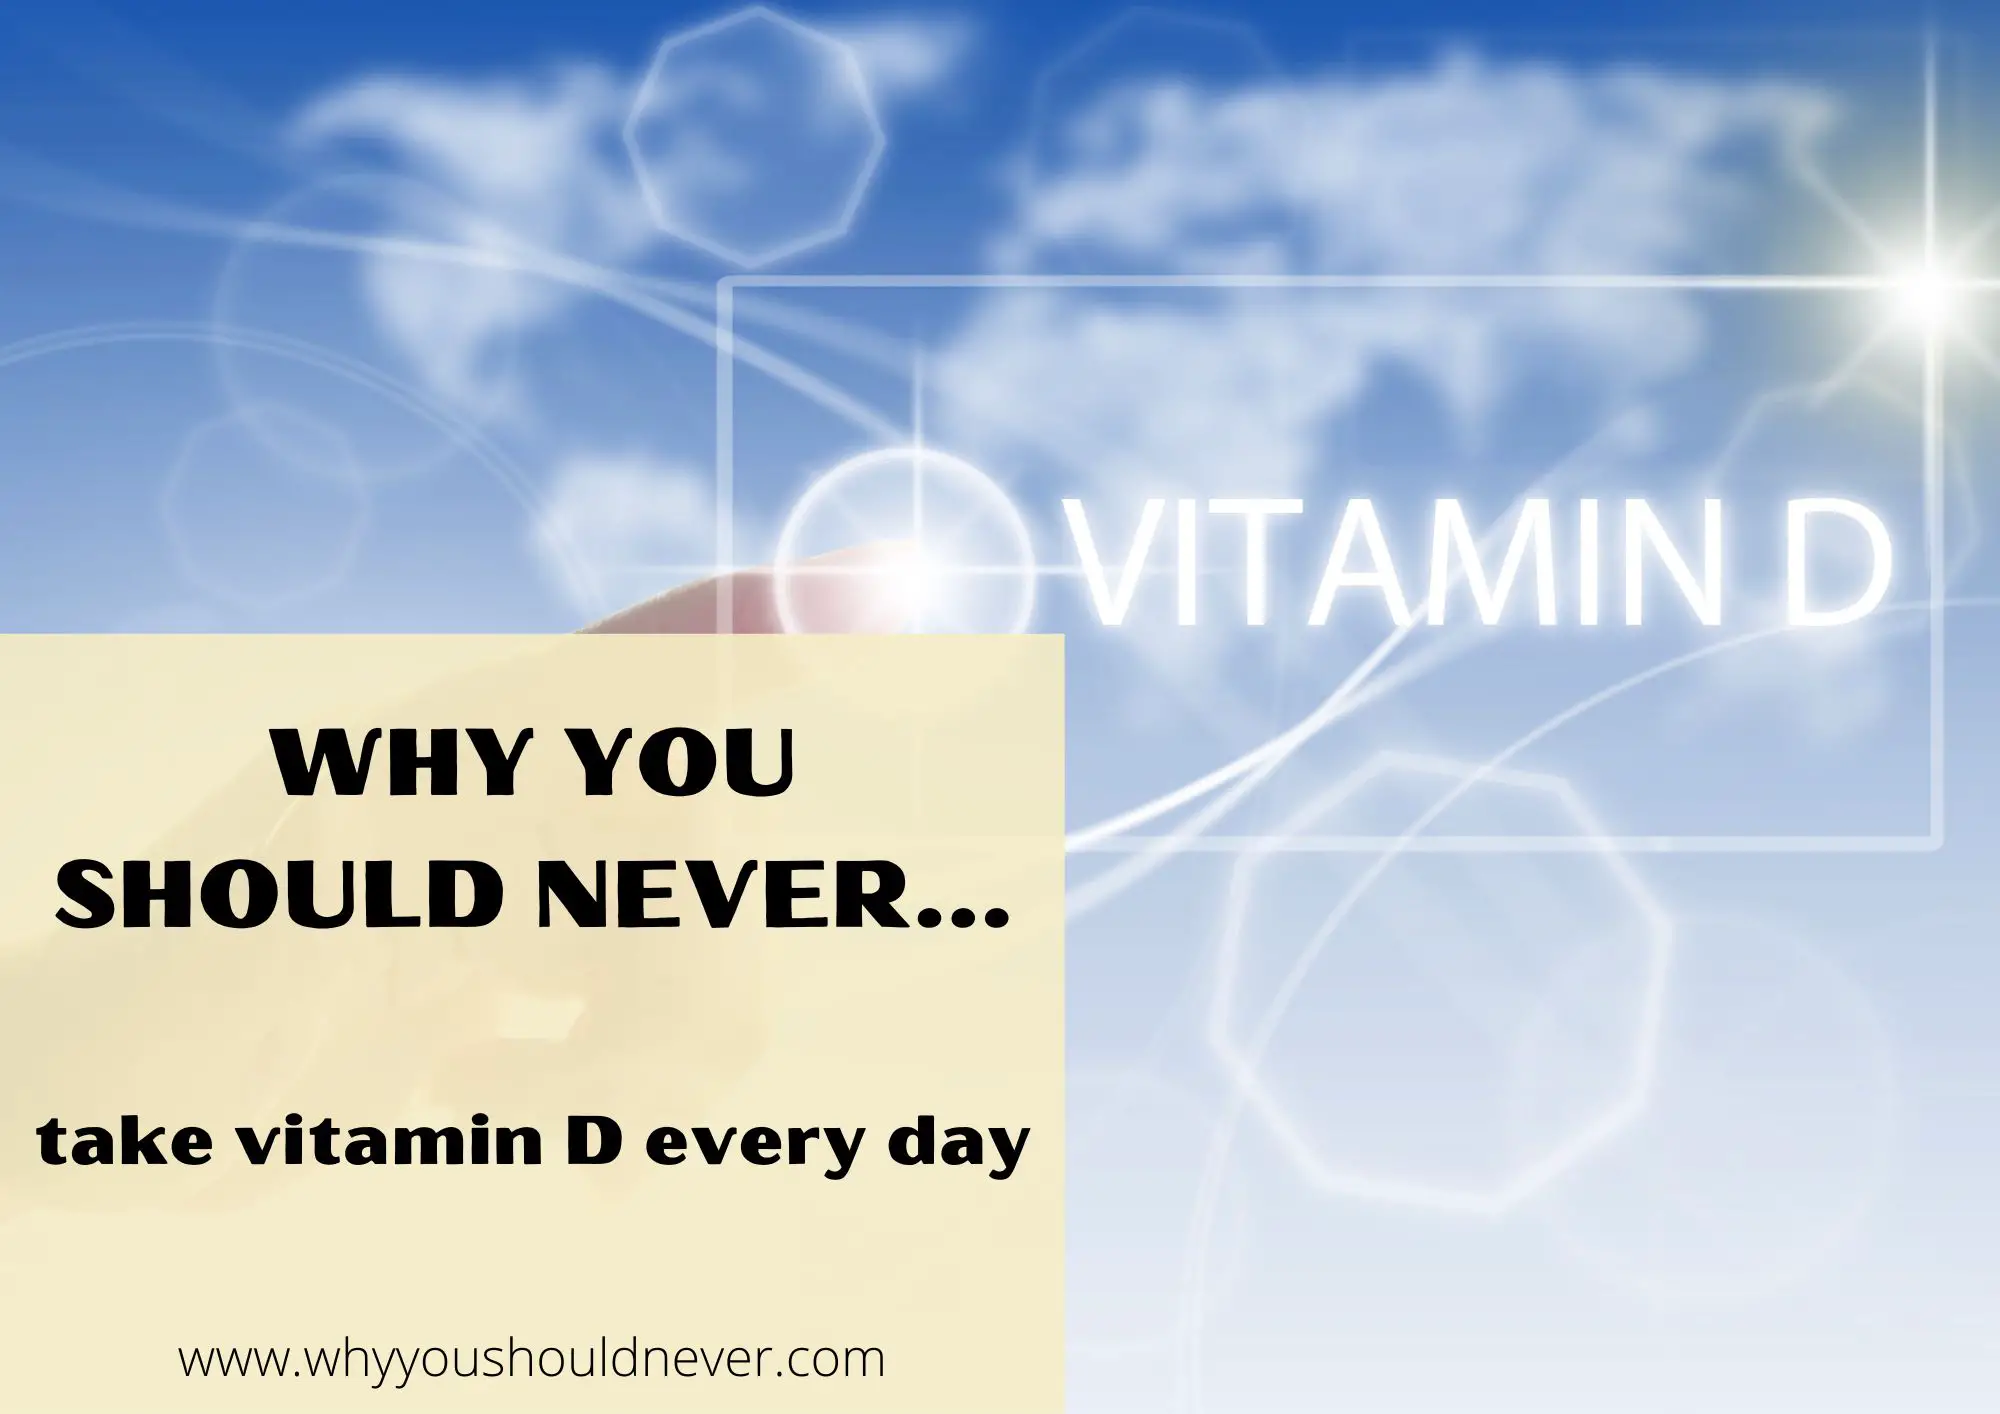 Why You Should Never Take Vitamin D Every Day